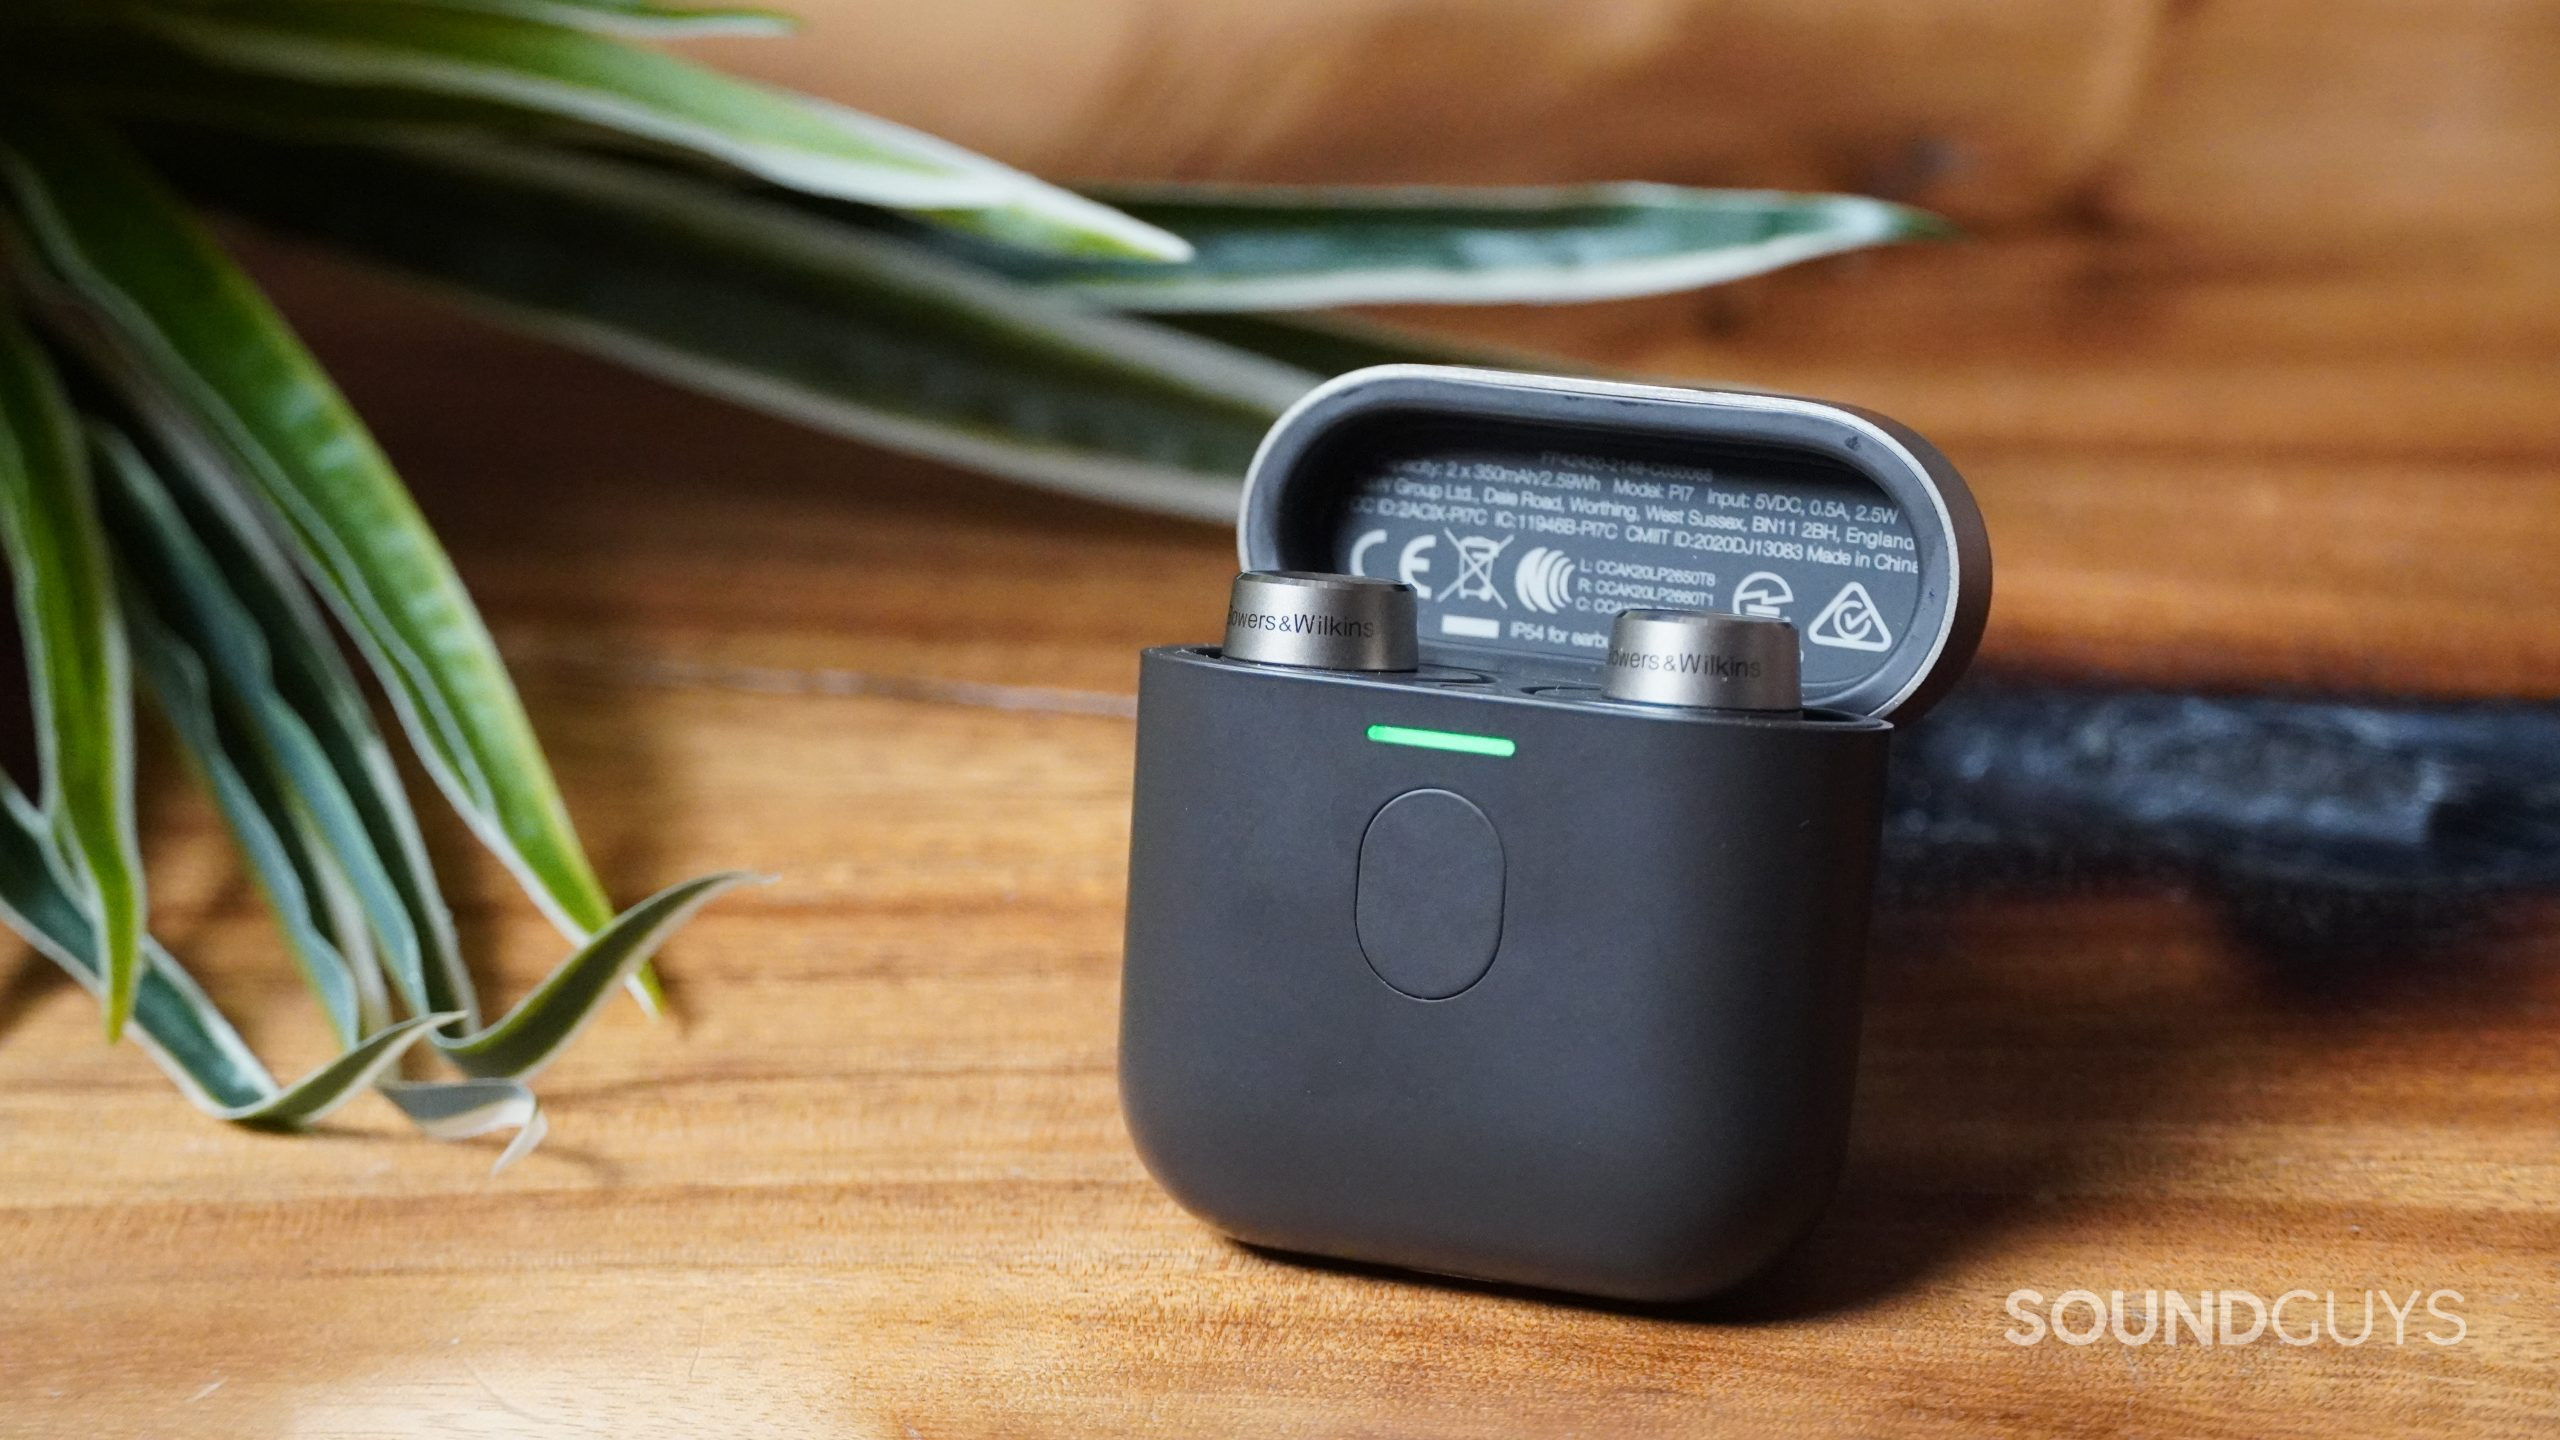 Bowers and Wilkins PI7 earbuds in charging case next to a plant.